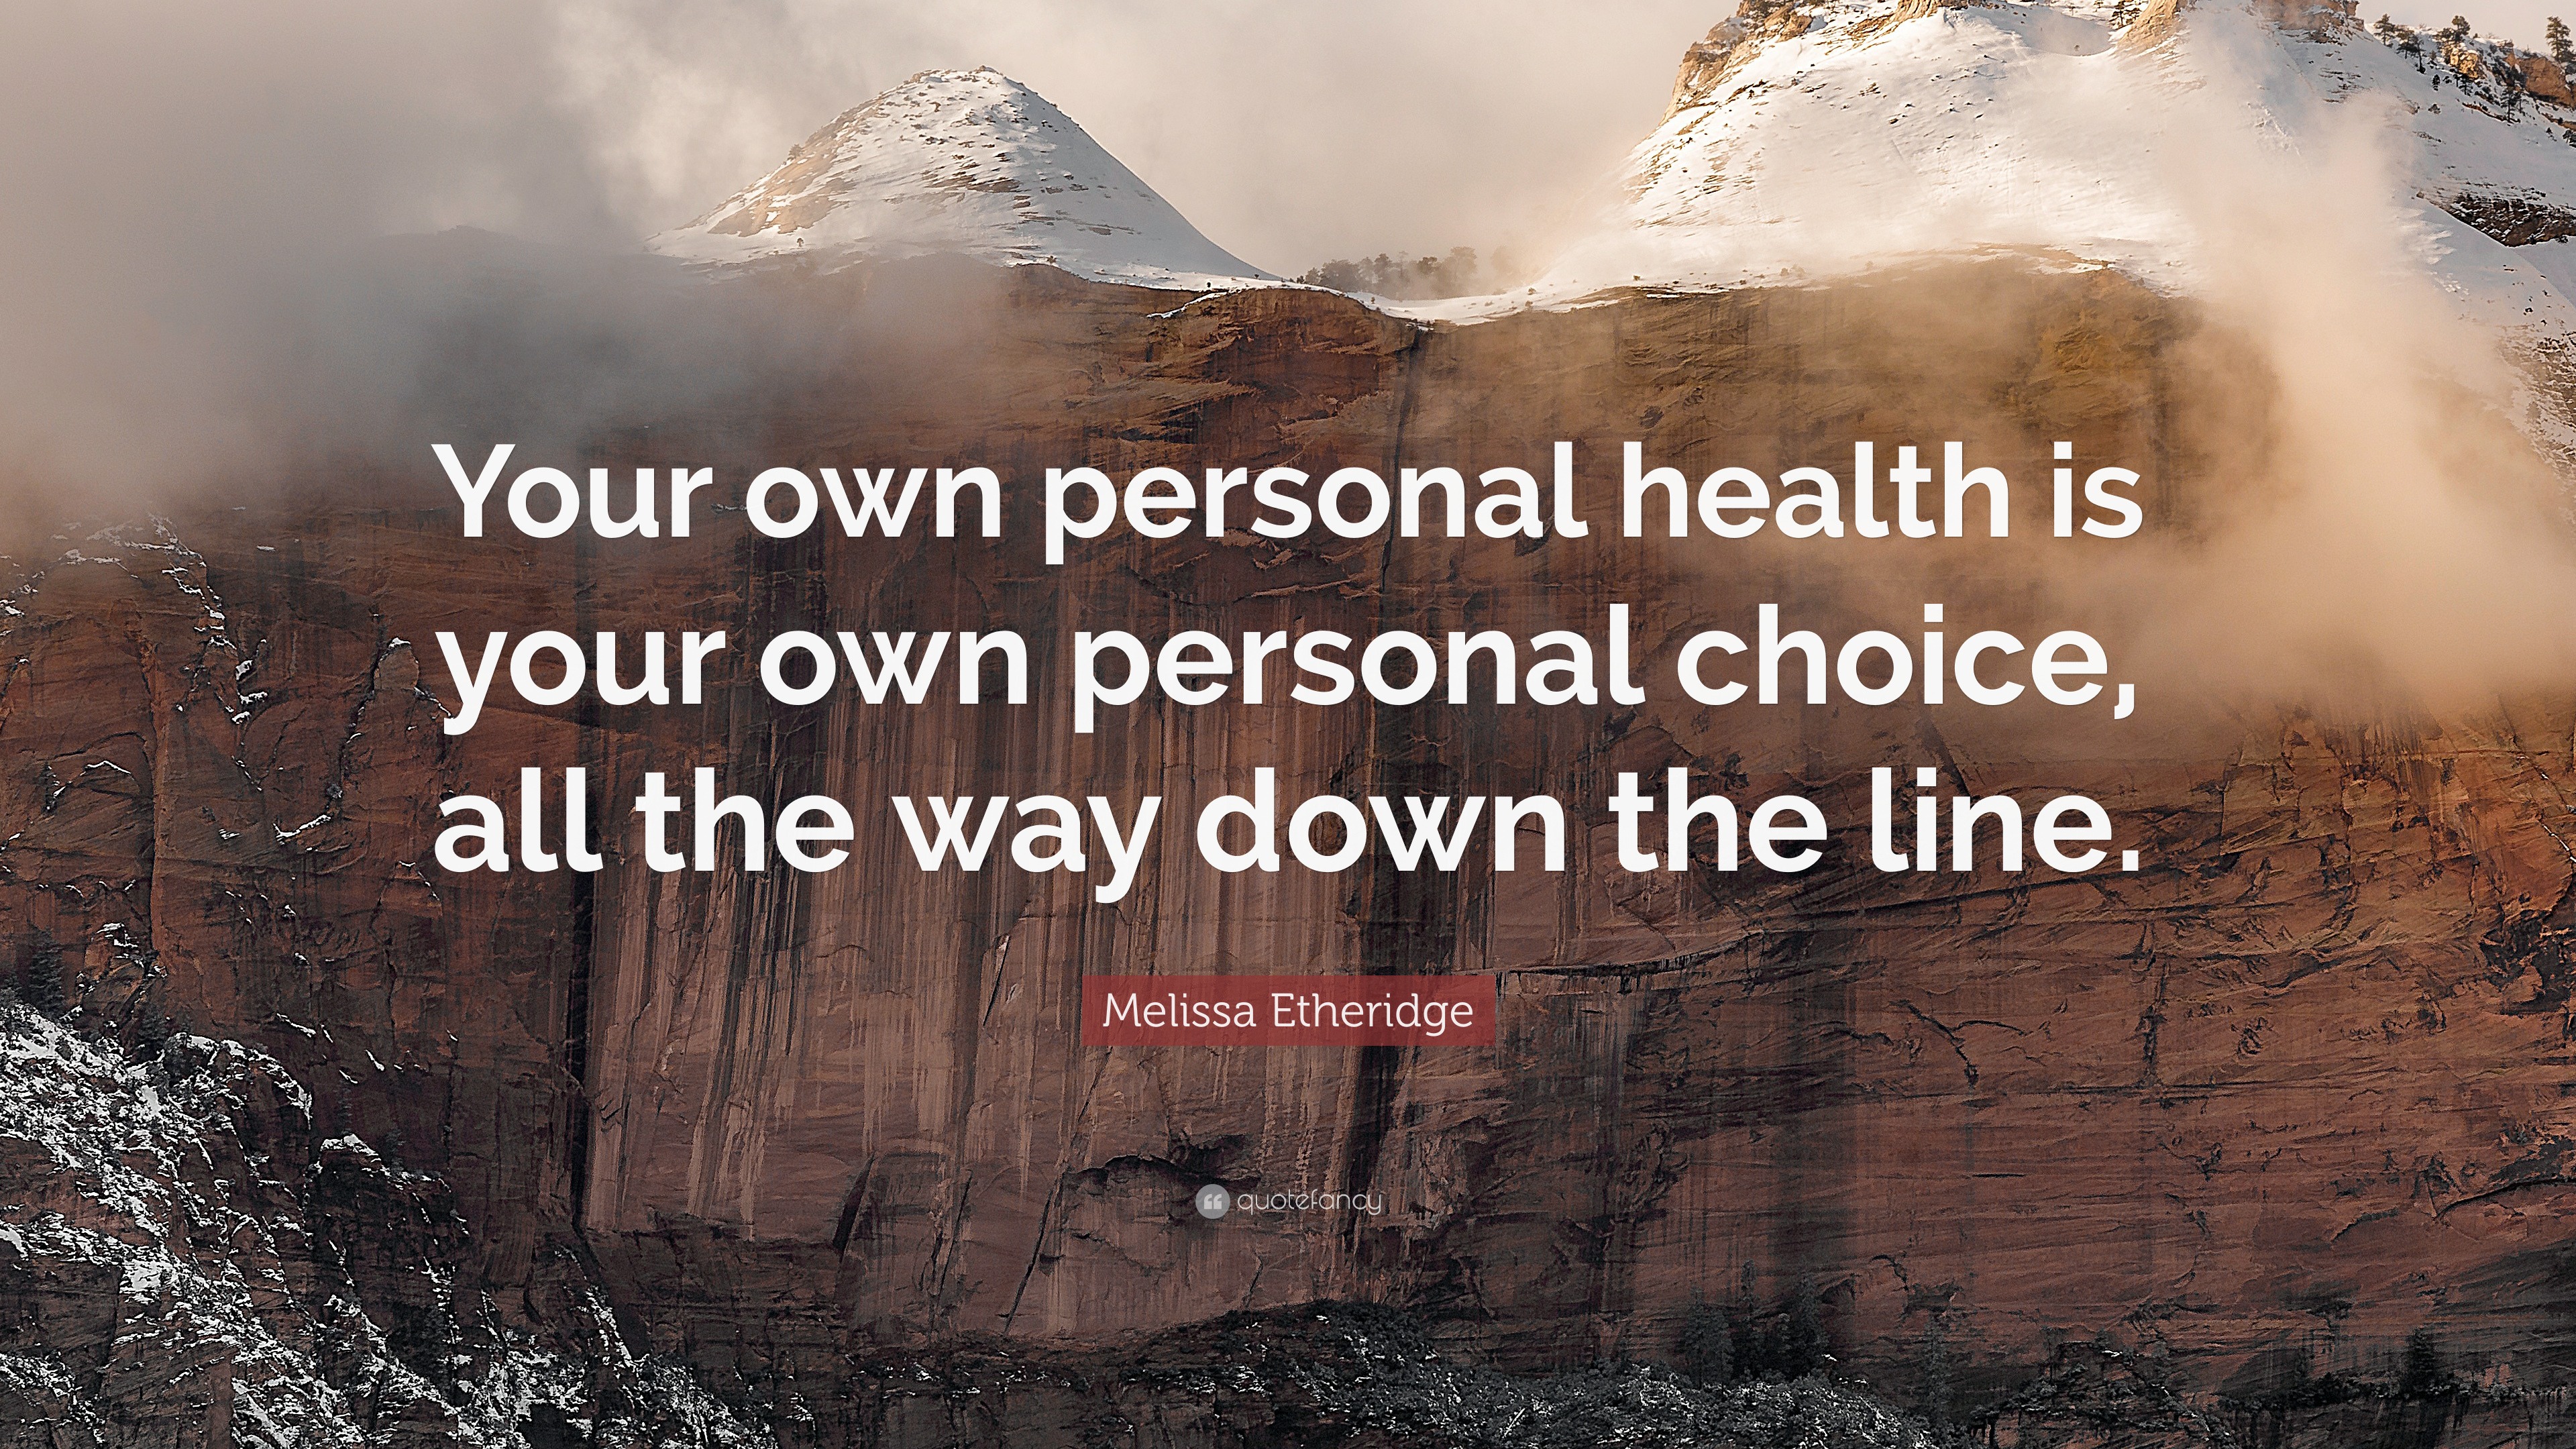 Melissa Etheridge Quote: “Your own personal health is your own personal choice, all the way down